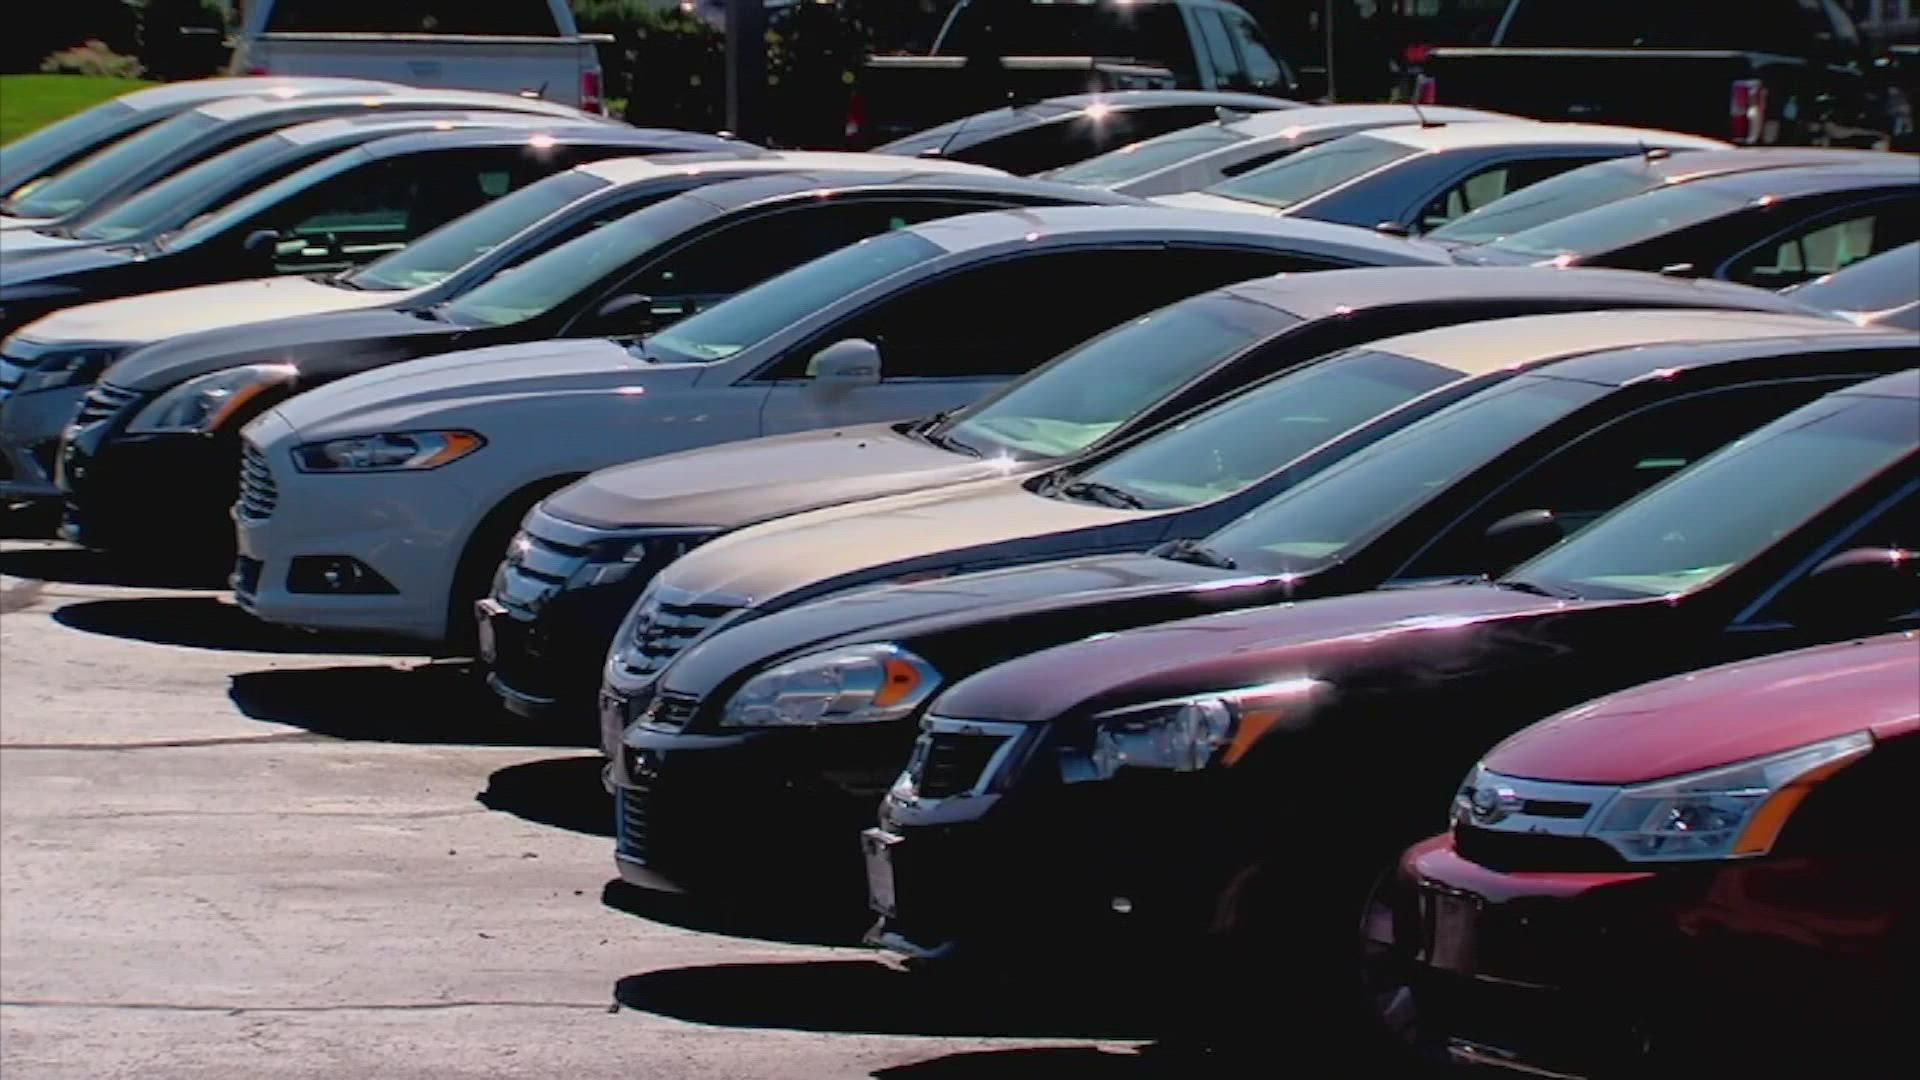 Consumer reporter John Matarese says buyers are facing the worst market in history for used cars. Experts say they should broaden their search to find a good deal.